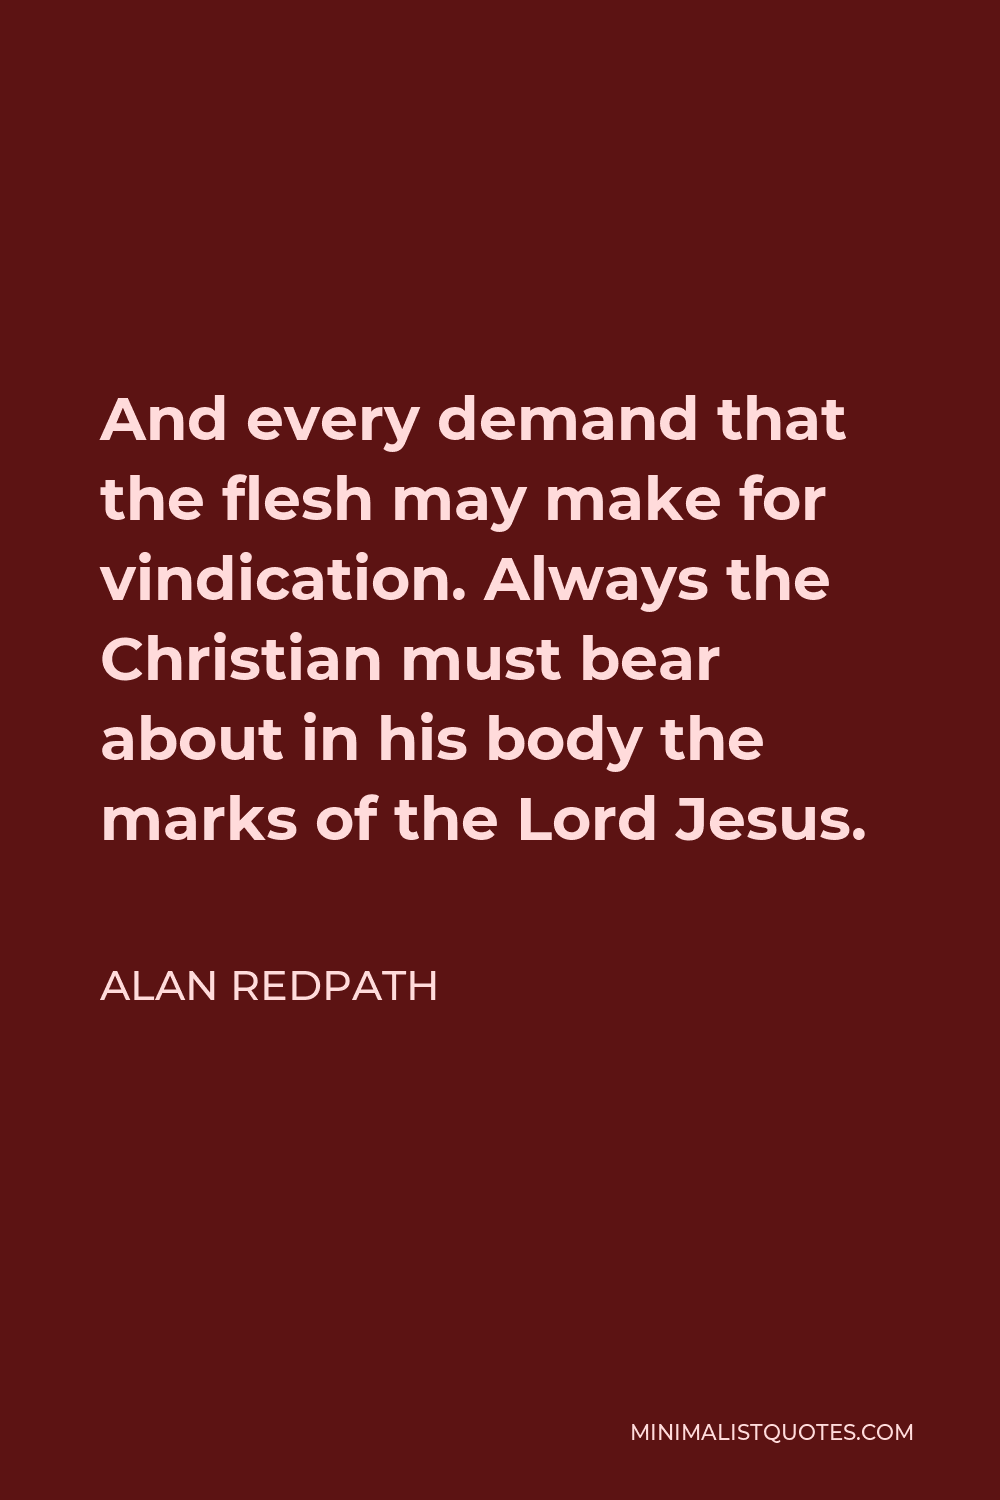 Alan Redpath Quote - And every demand that the flesh may make for vindication. Always the Christian must bear about in his body the marks of the Lord Jesus.